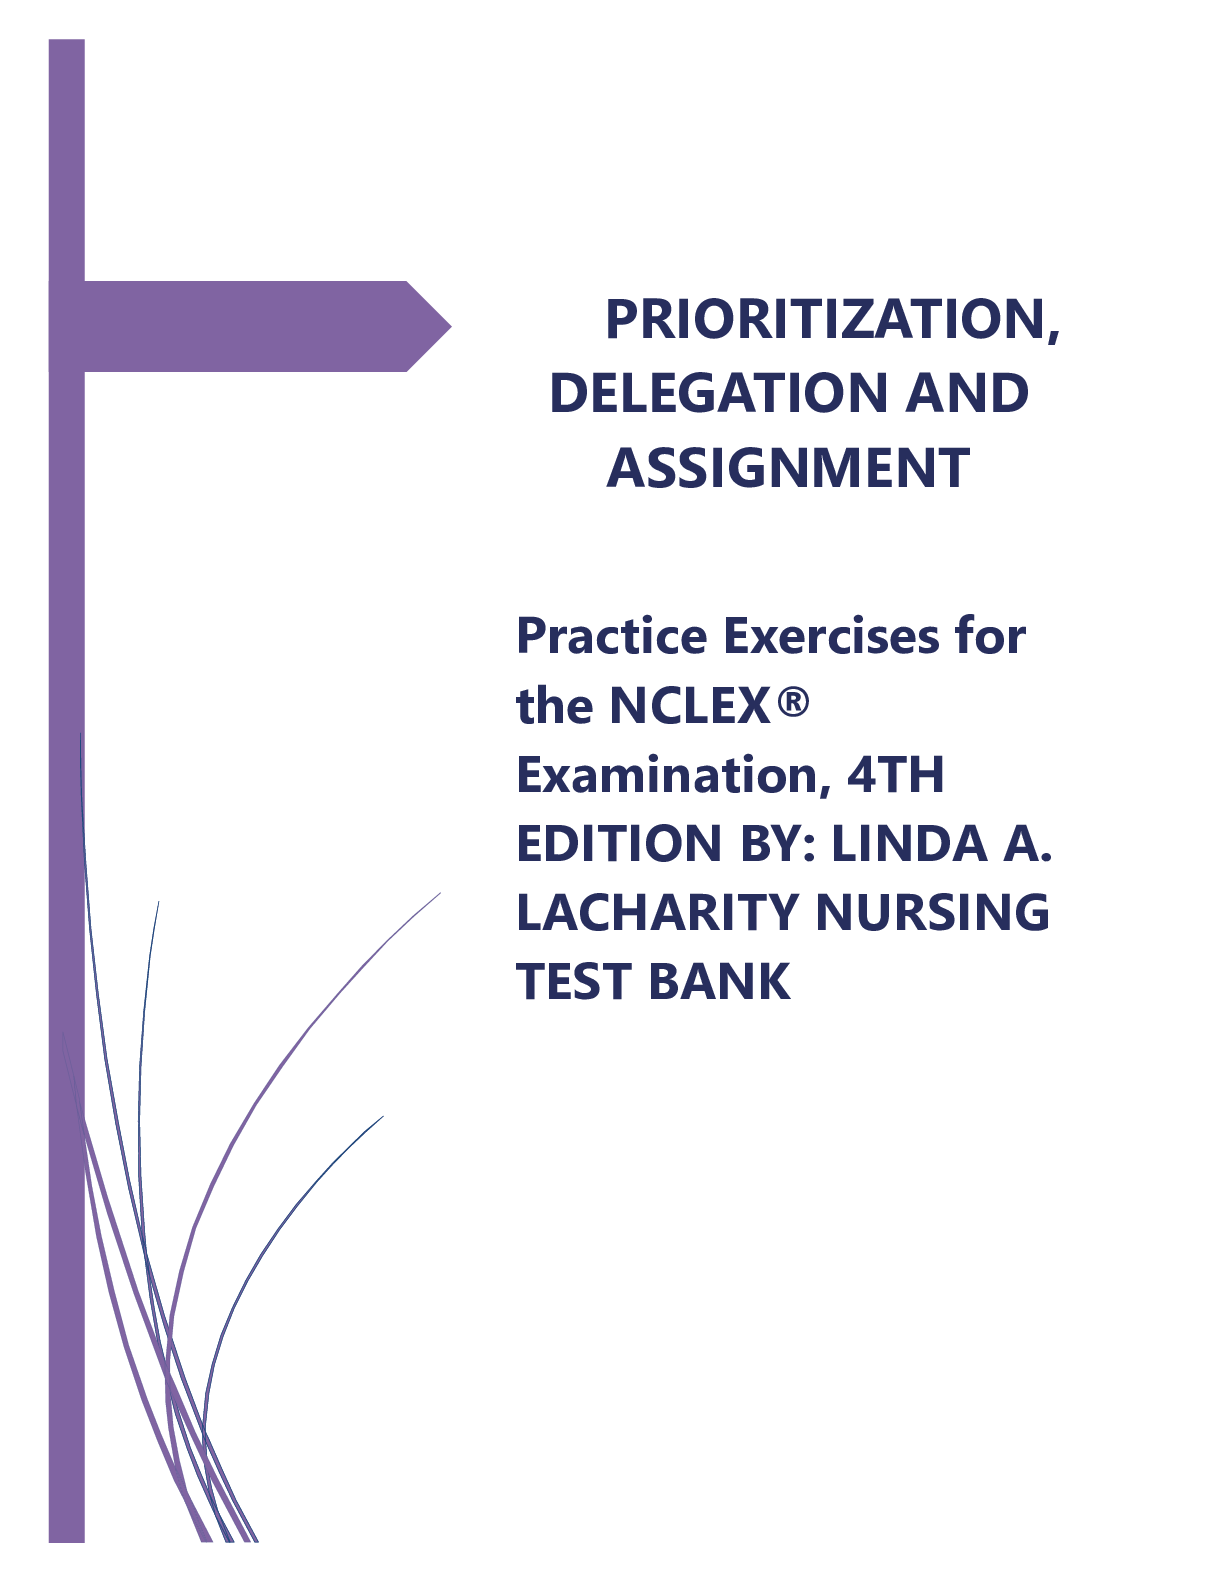 lacharity prioritization delegation and assignment pdf